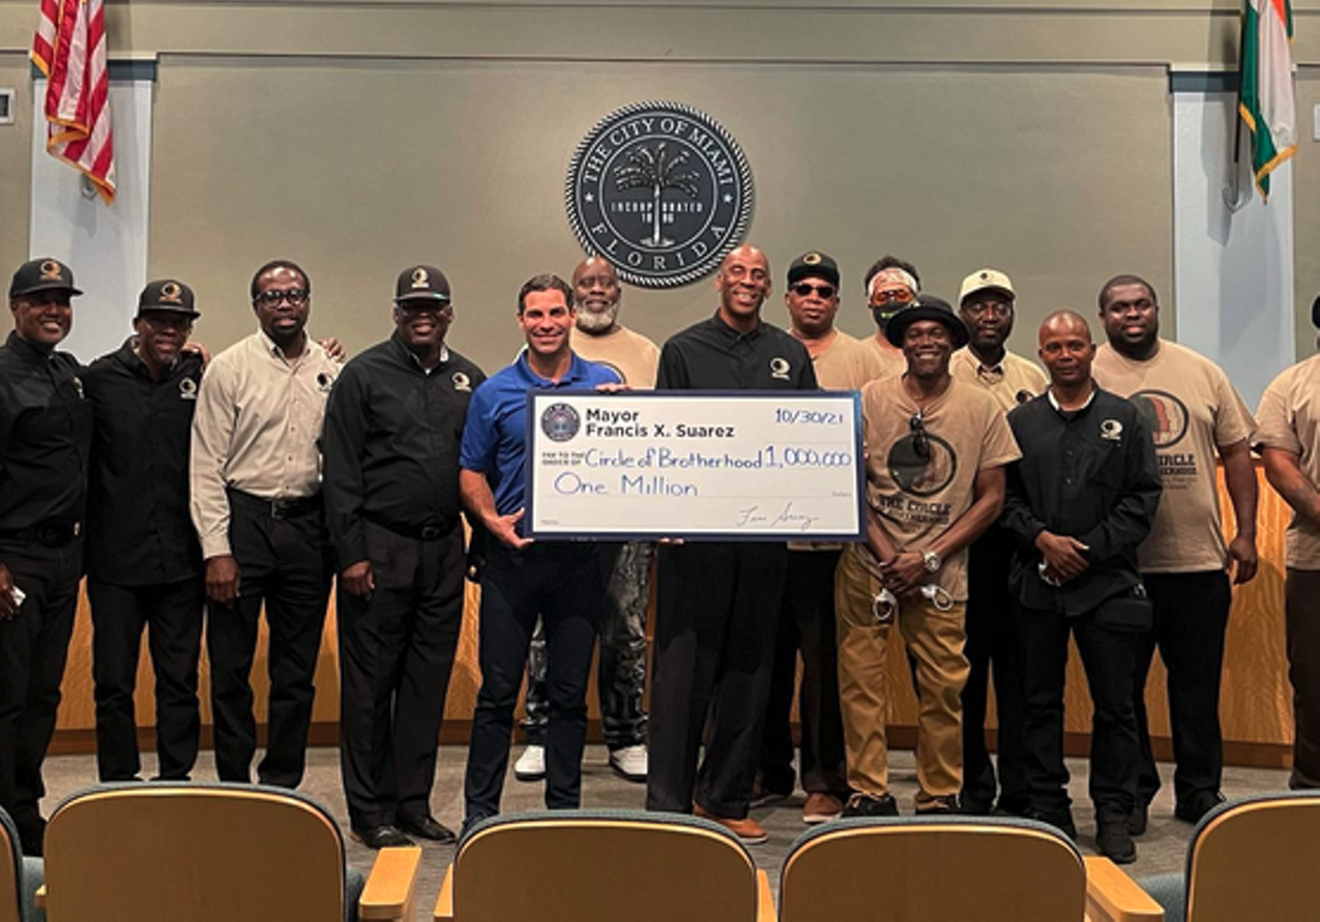 The October 2021 ceremony in which Mayor Suarez presented a million-dollar check to the Circle of Brotherhood may have been nothing more than a big photo-op, the group says.